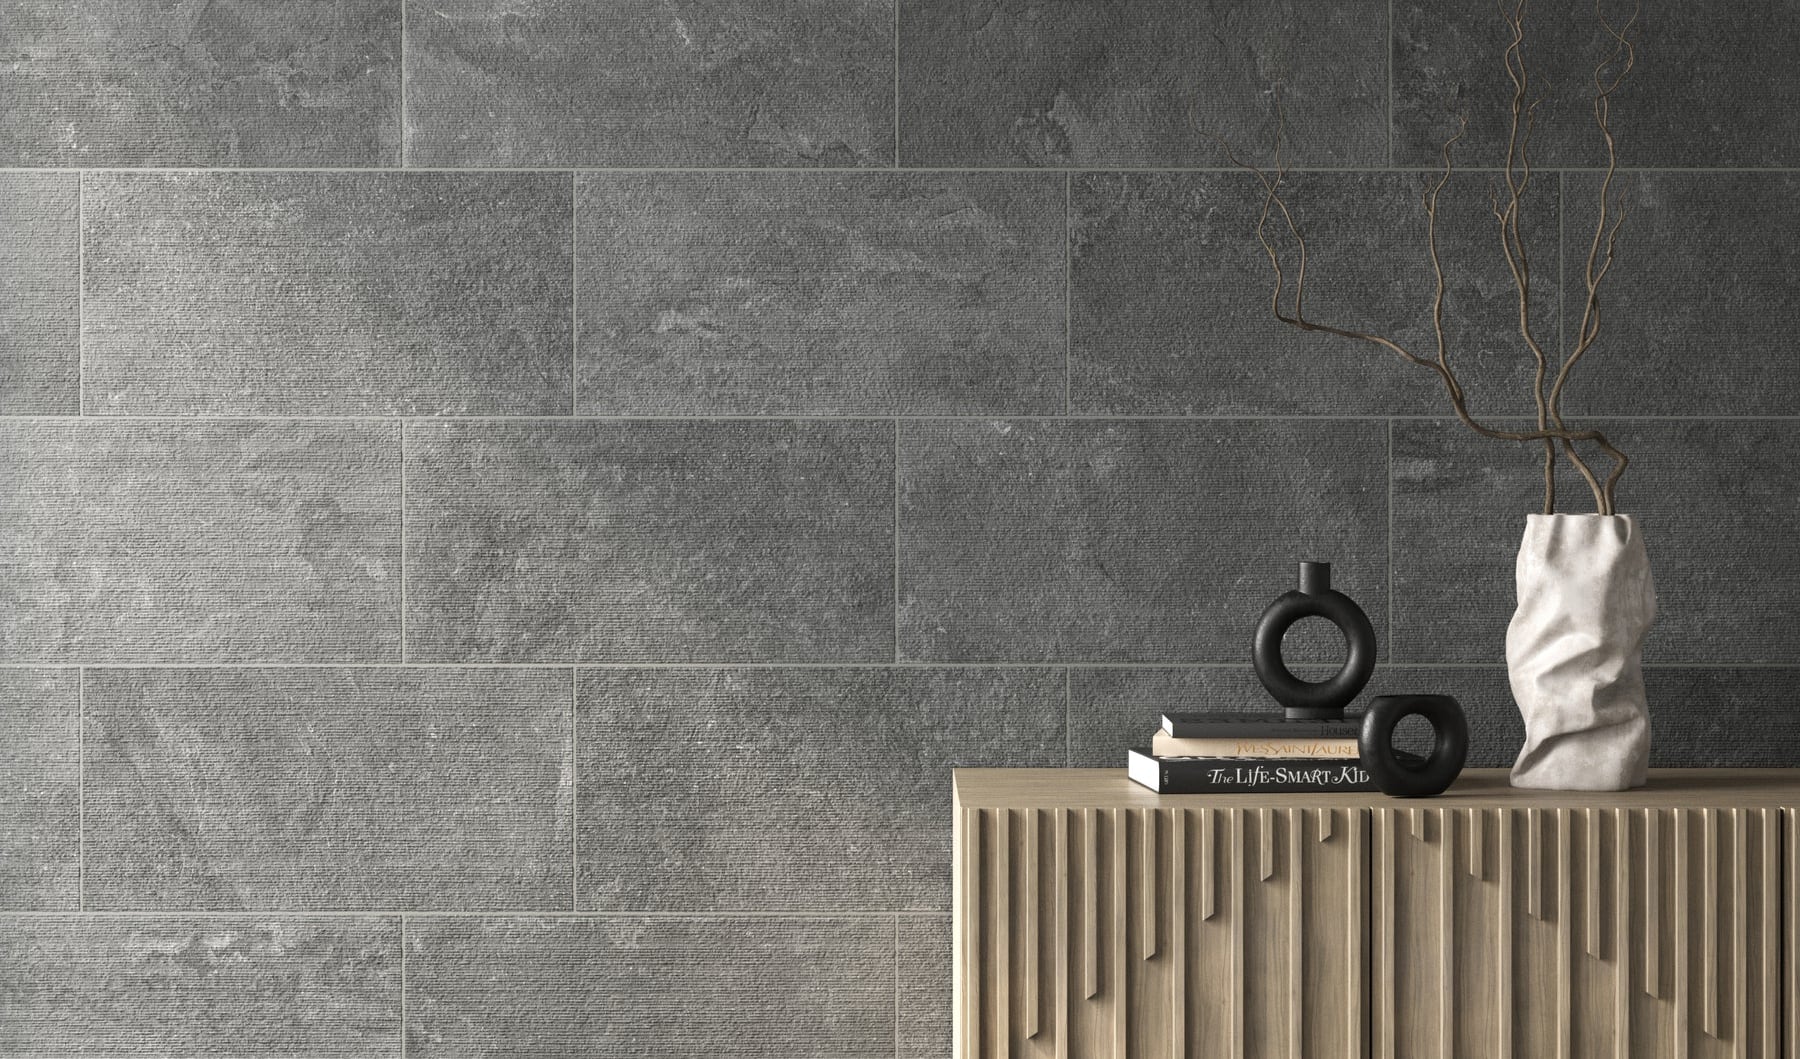 Textured dark grey tile provides a sophisticated backdrop, enhancing the sleek decor on a minimalist wooden console